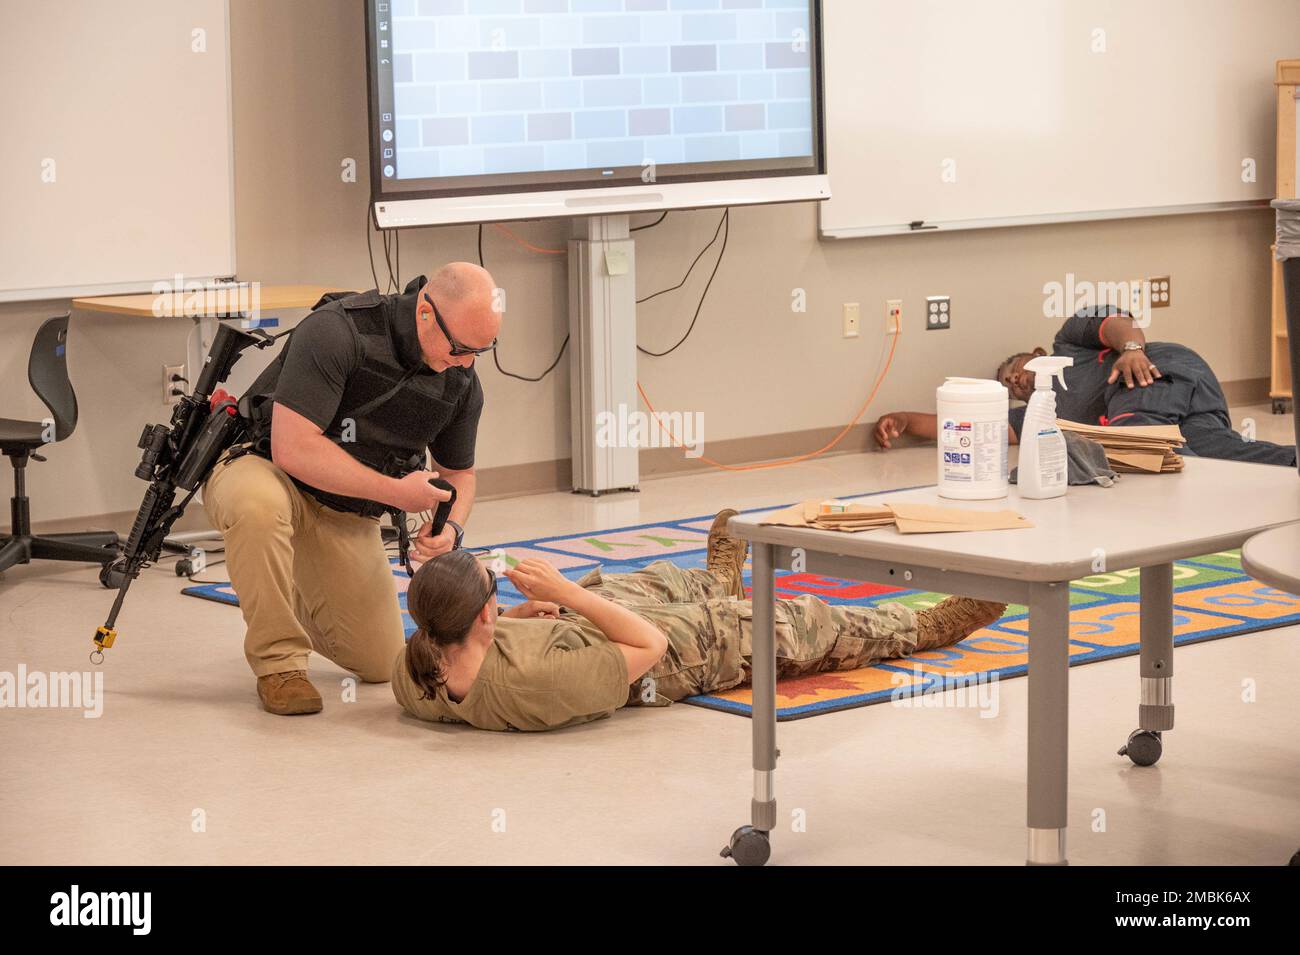 Andrew Stone, a Fort Jackson Department of the Army civilian police officer, applies a tourniquet to the arm of a mock school shooting victim at Pierce Terrance Elementary School June 16, 2022. The active shooter event was part of an annual law enforcement training event where officers entered the classroom alone to neutralize the shooter, treat the wounded with basic first aid, and evacuate the victims to the nearest medical treatment facility. Stock Photo